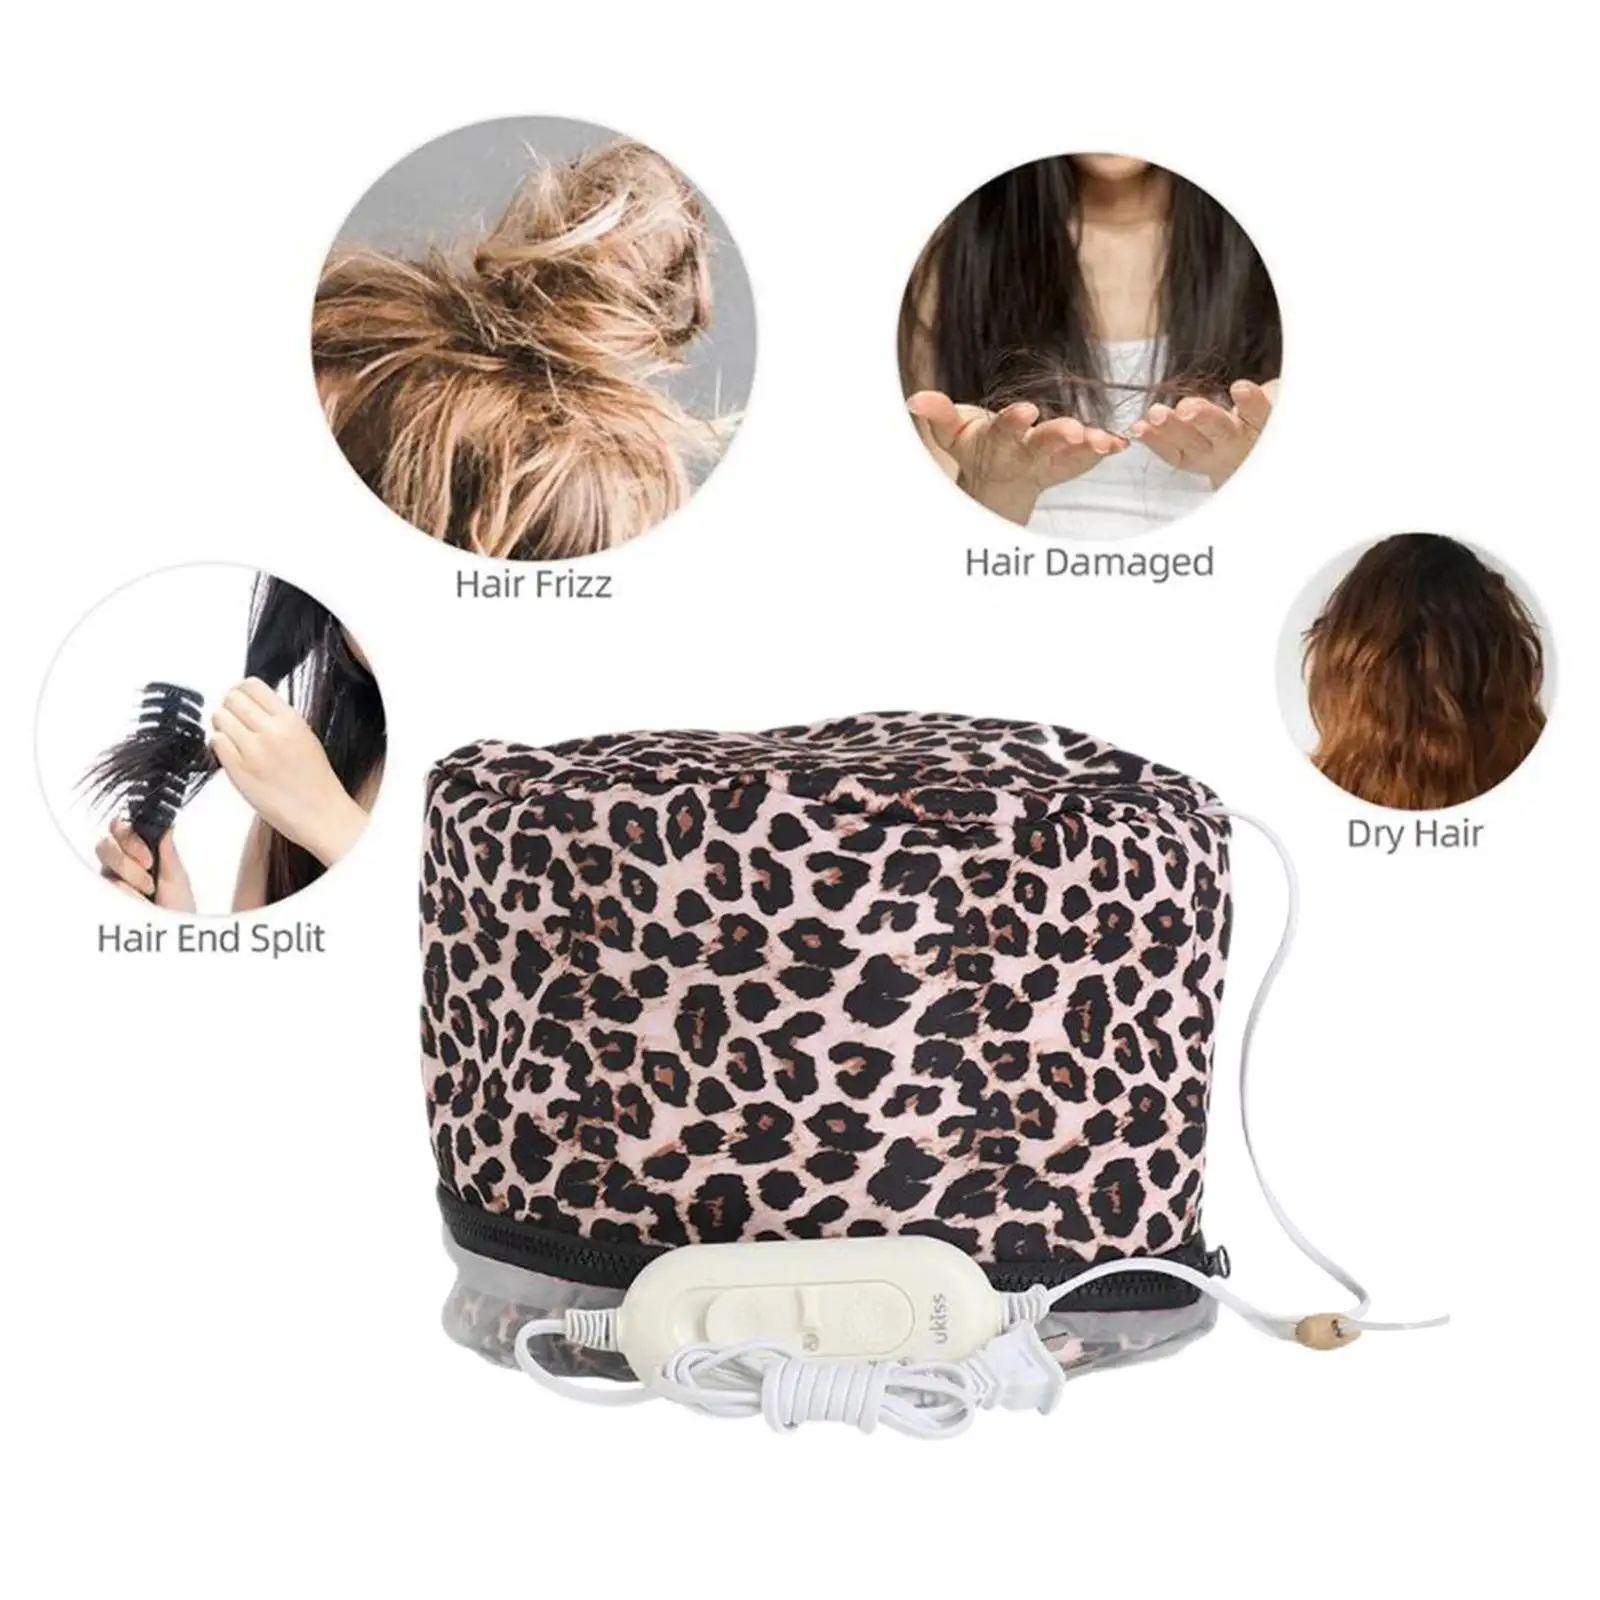 Hair Care Hat Moisturize Hair SPA Nourishing Thermal Hair Caps Personal Care 3 Modes Temperature Control Leopard Print US images - 6